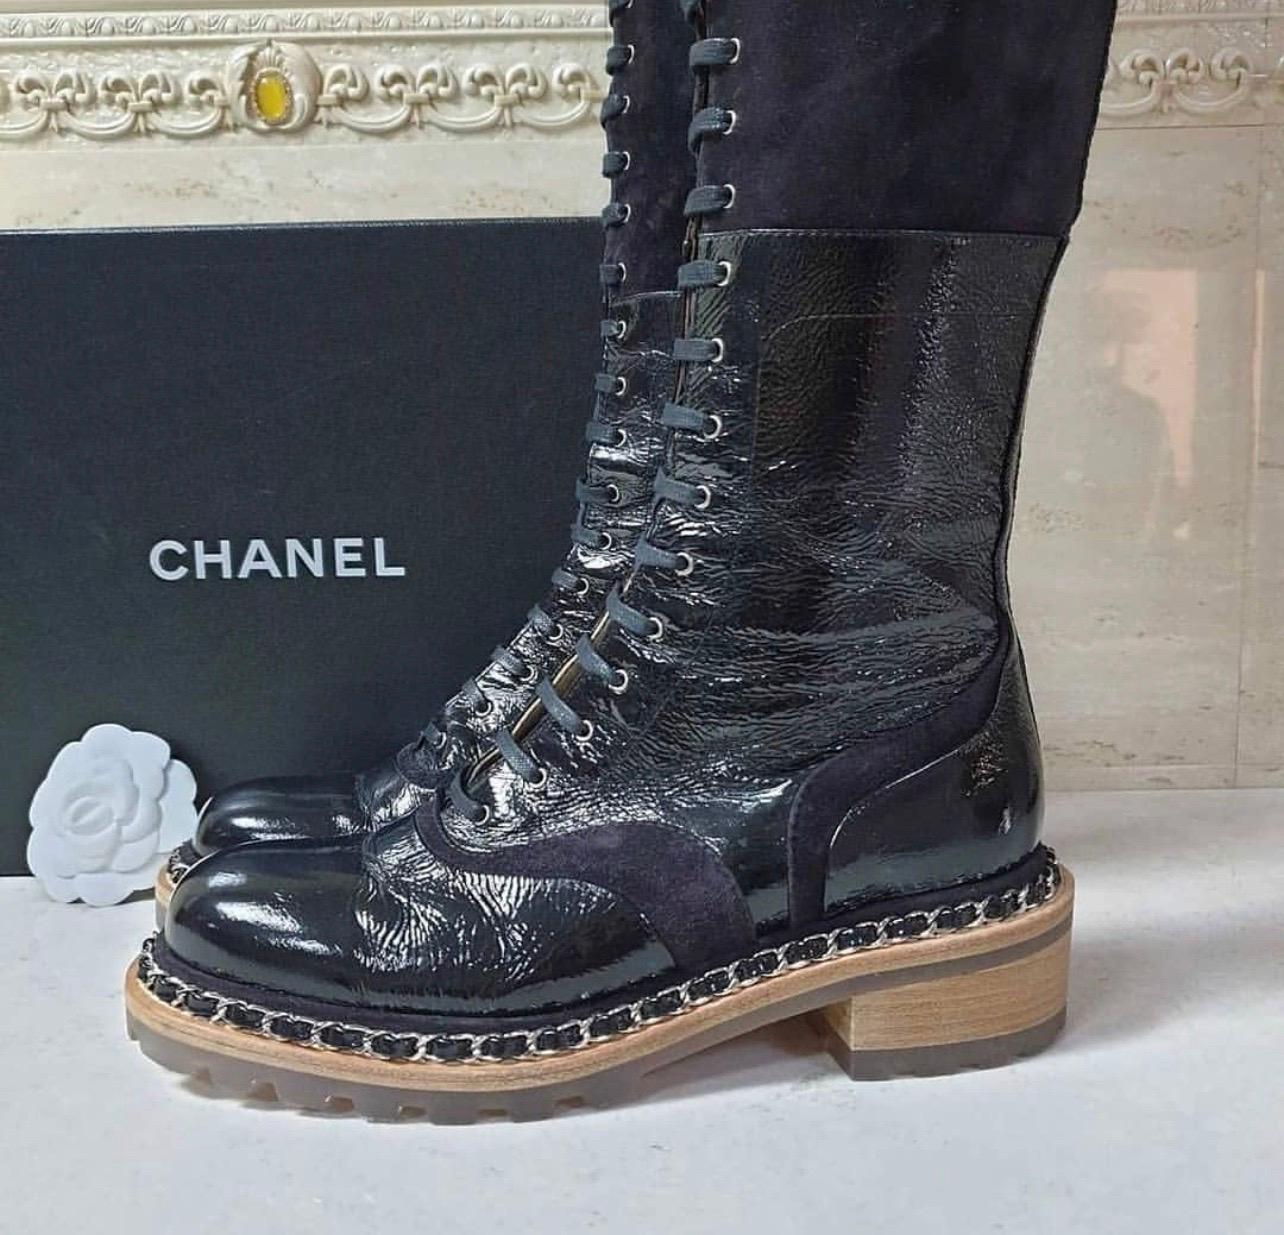 CHANEL 2015 Paris Salzburg Boots.  
Incredible Chanel black patent leather, suede & chain boots.
Sz.38
Condition is very good.
No original packaging.
For buyers from EU we can provide shipping from Poland. Please demand if you need.